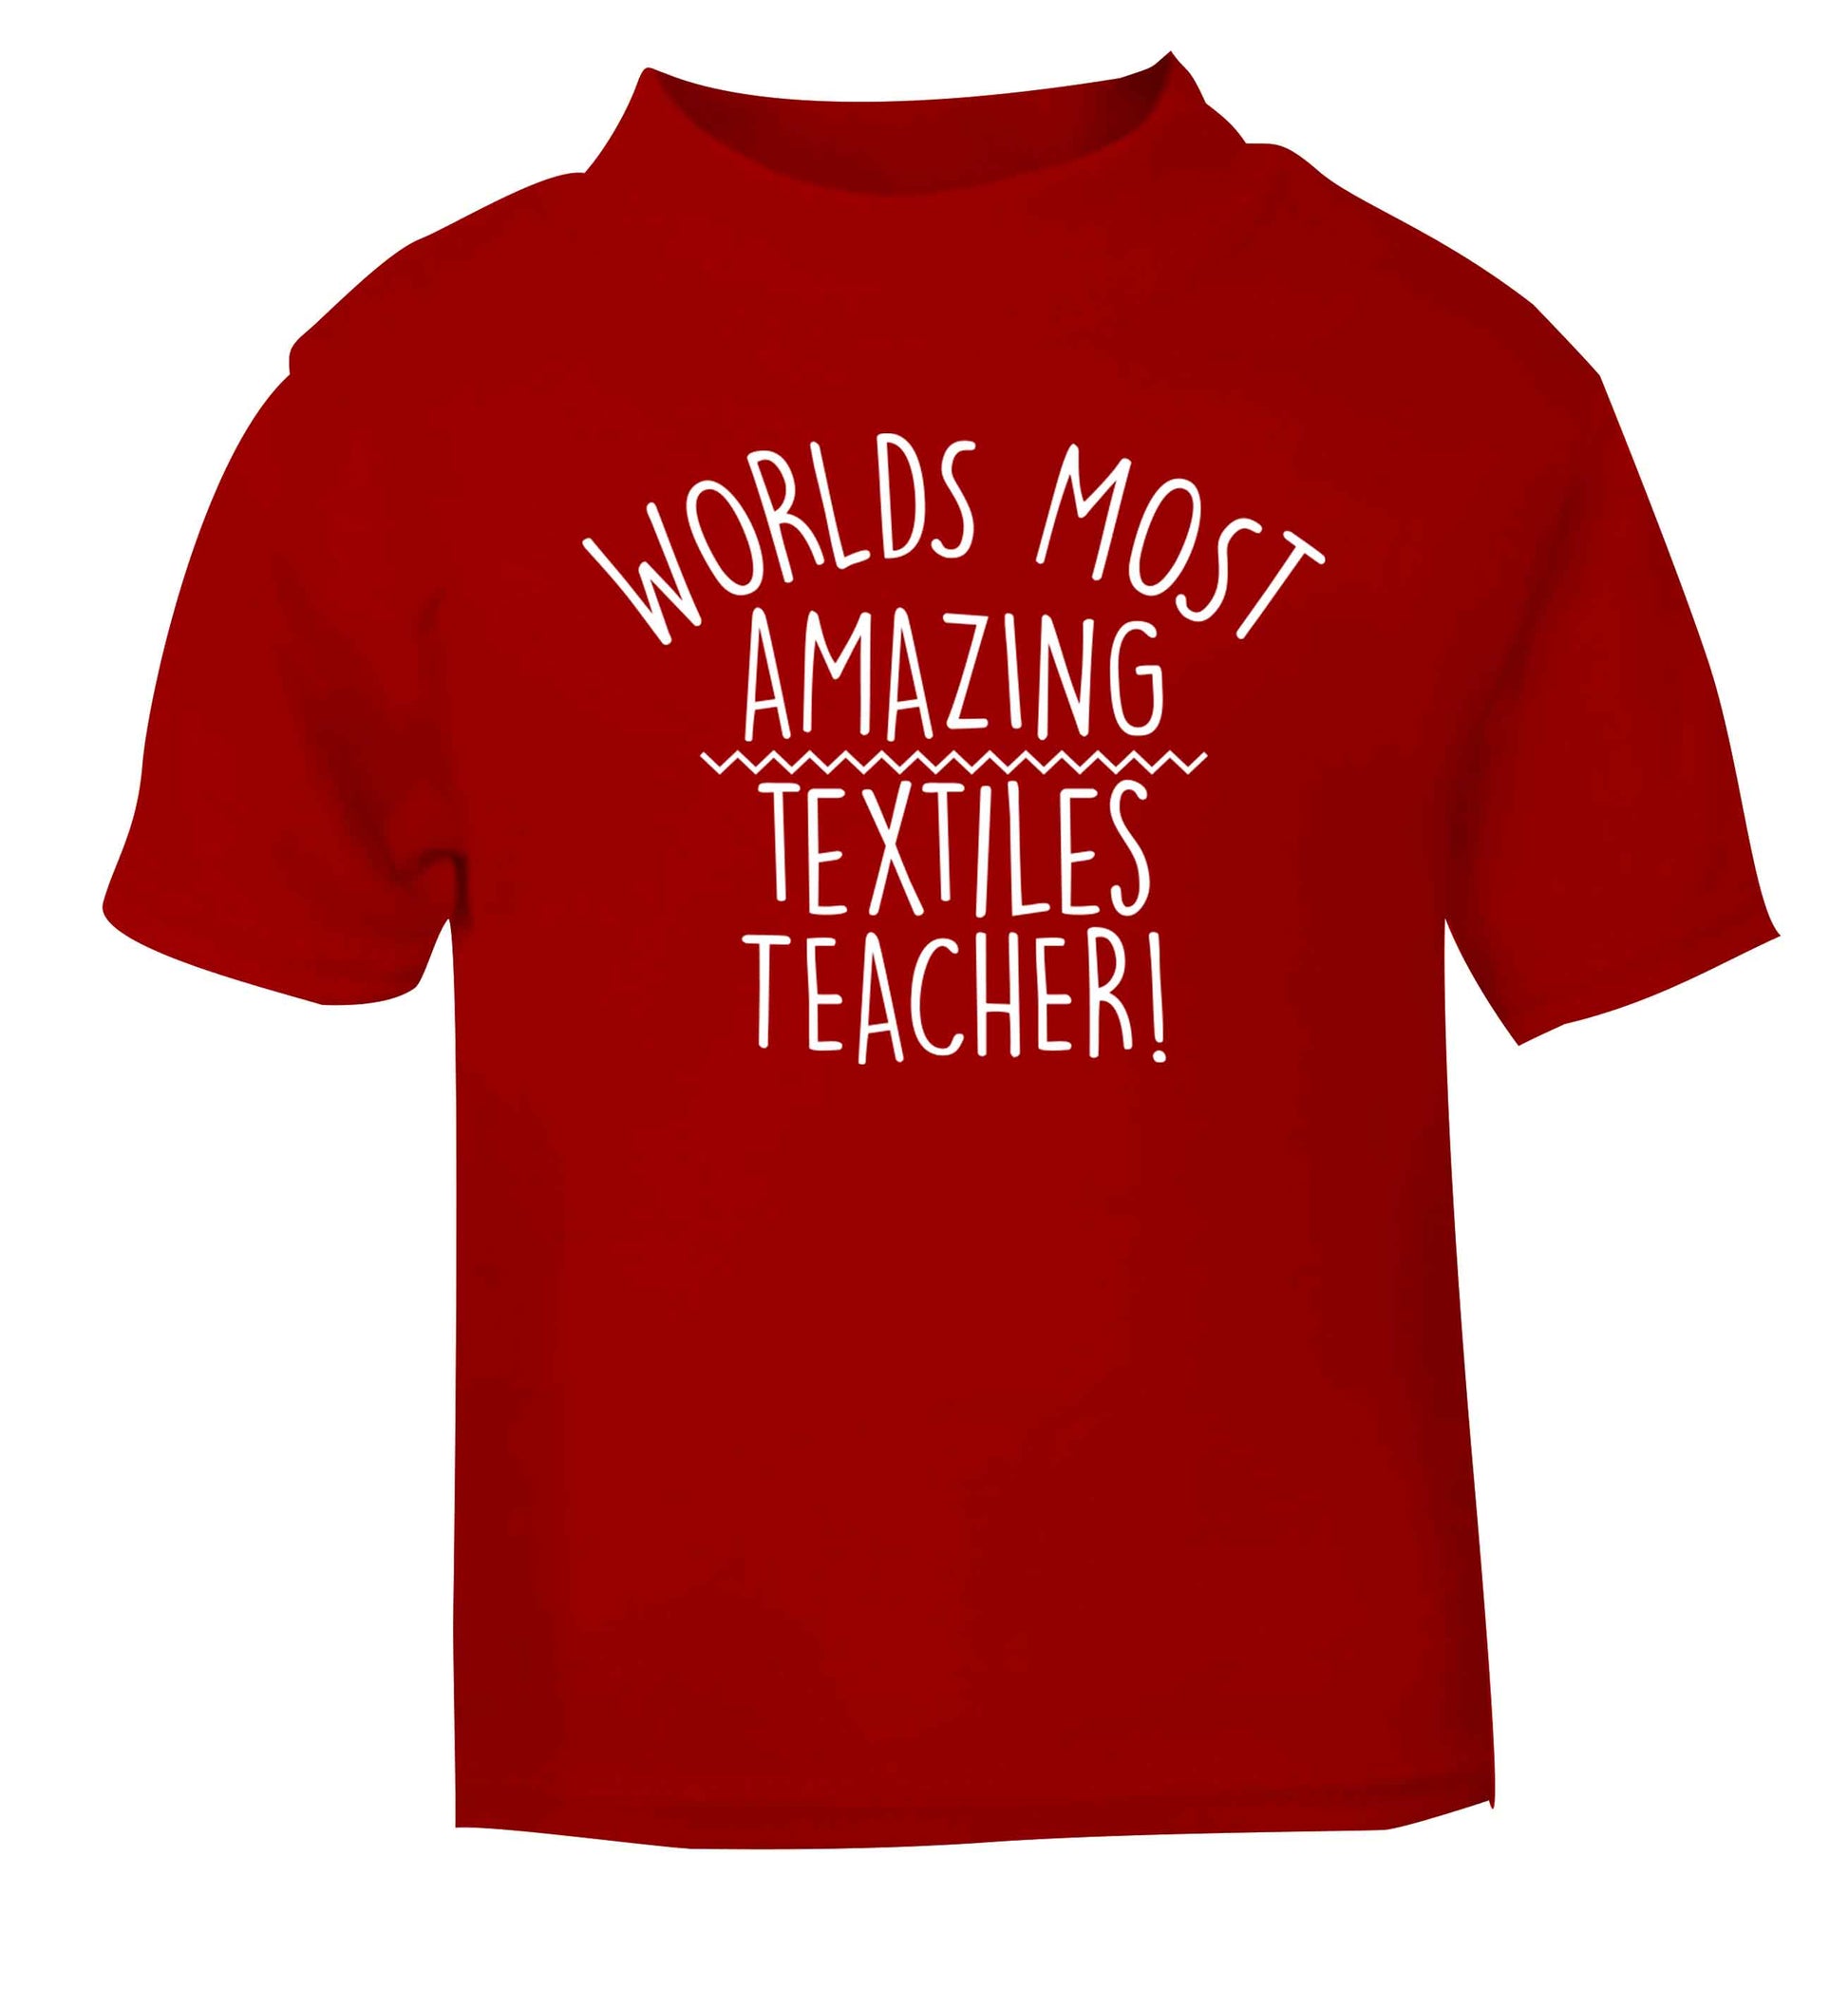 Worlds most amazing textiles teacher red baby toddler Tshirt 2 Years